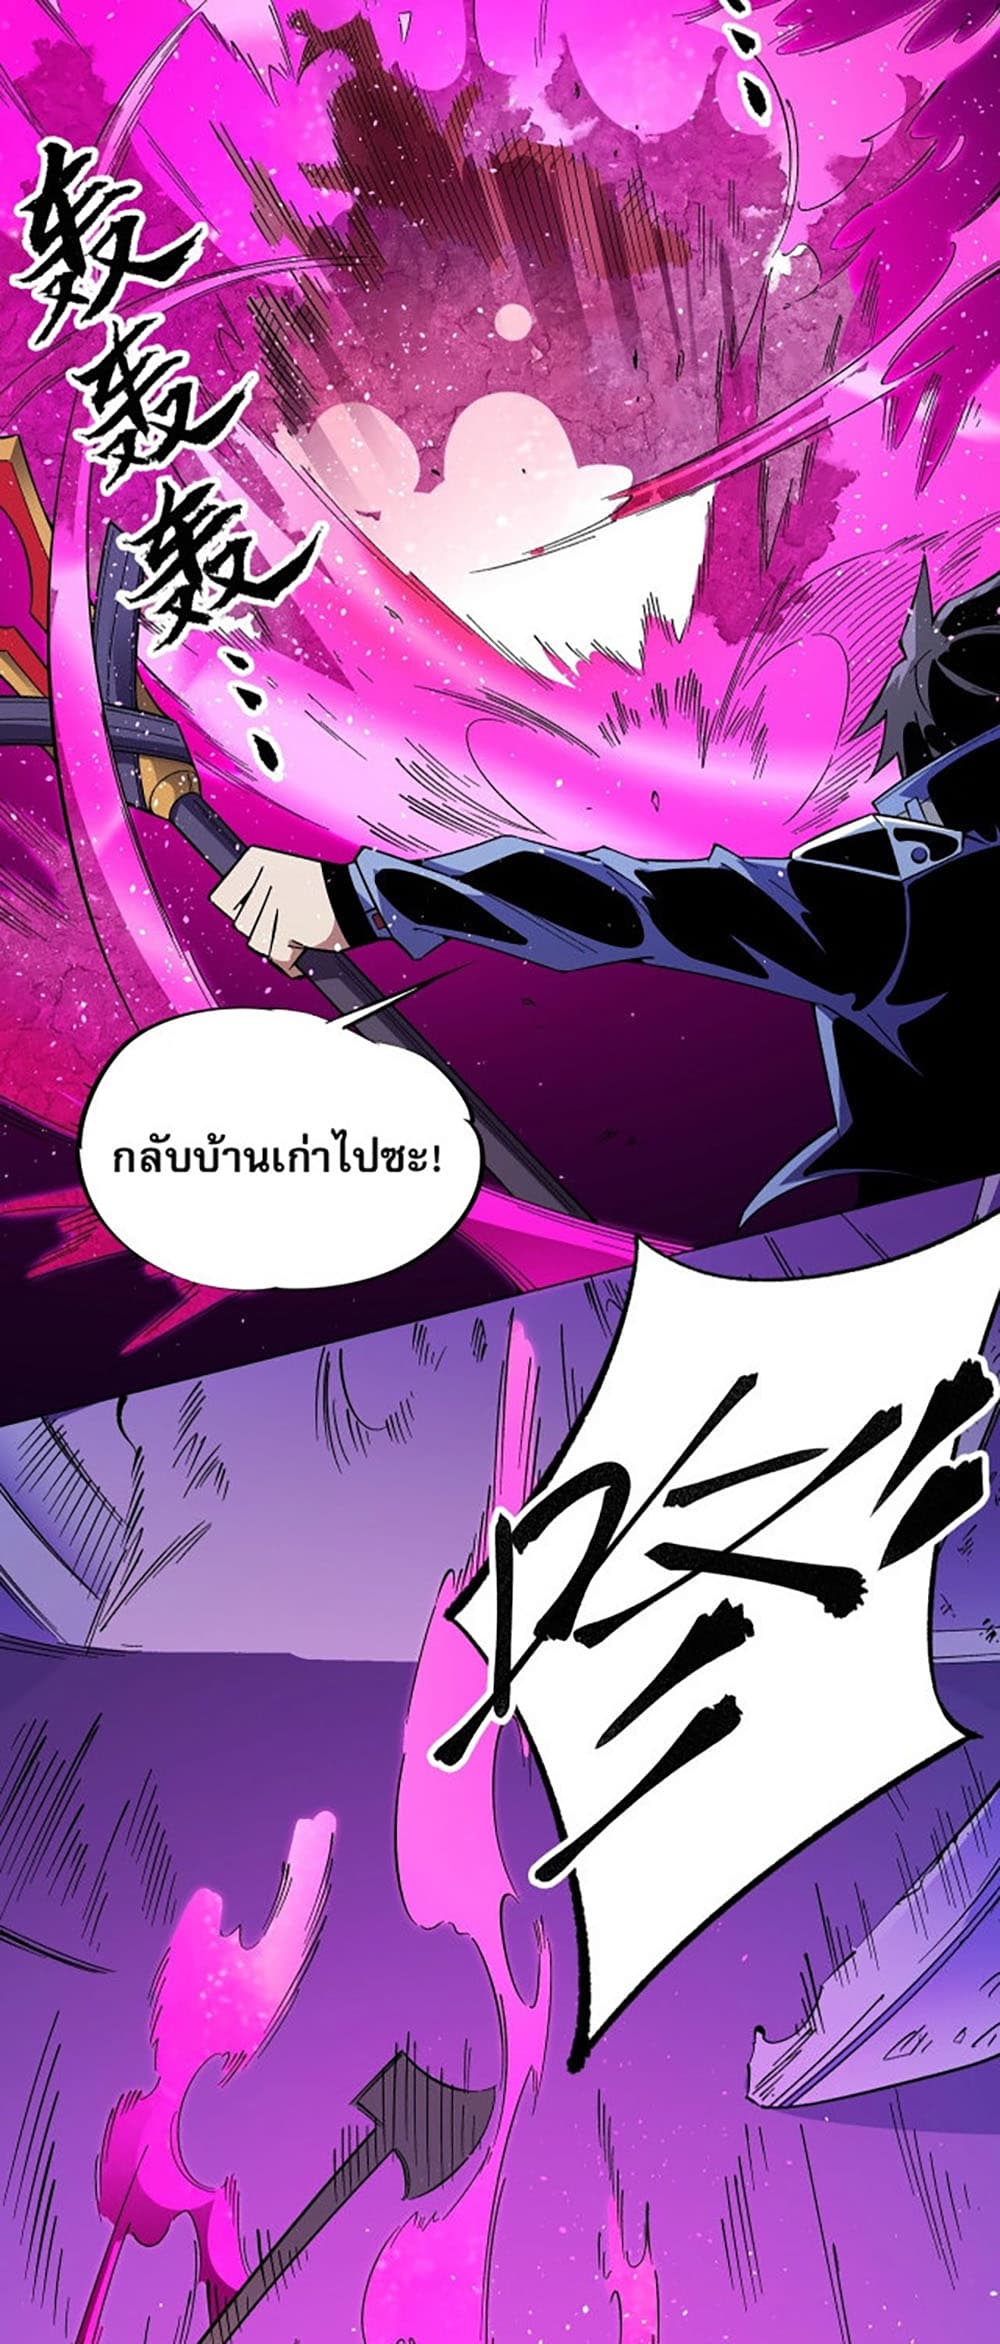 Job Changing for the Entire Population: The Jobless Me Will Terminate the Gods ฉันคือผู้เล่นไร้อาชีพที่สังหารเหล่าเทพ 13-13